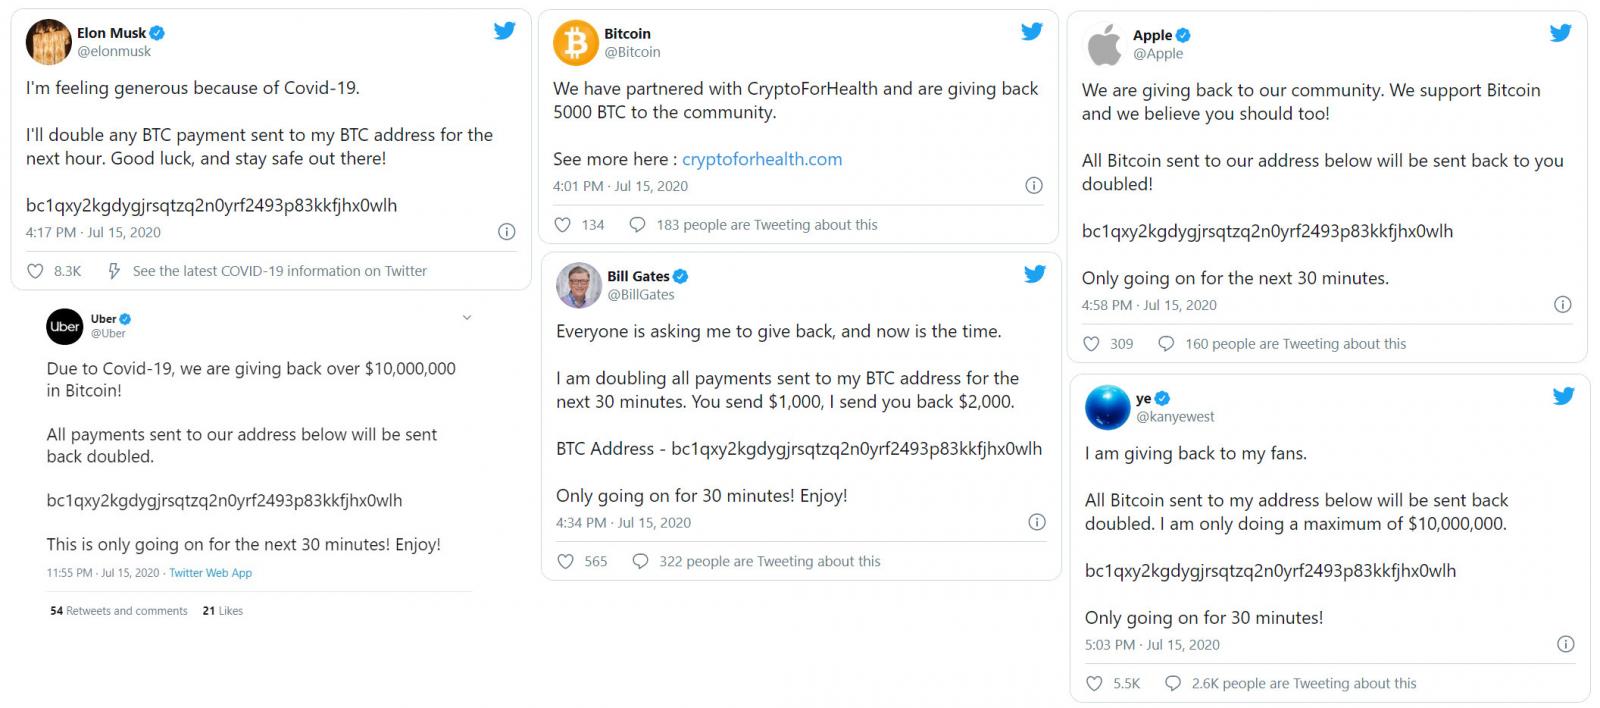 Apple, Kanye, Gates, Bezos, more hacked in Twitter account crypto scam